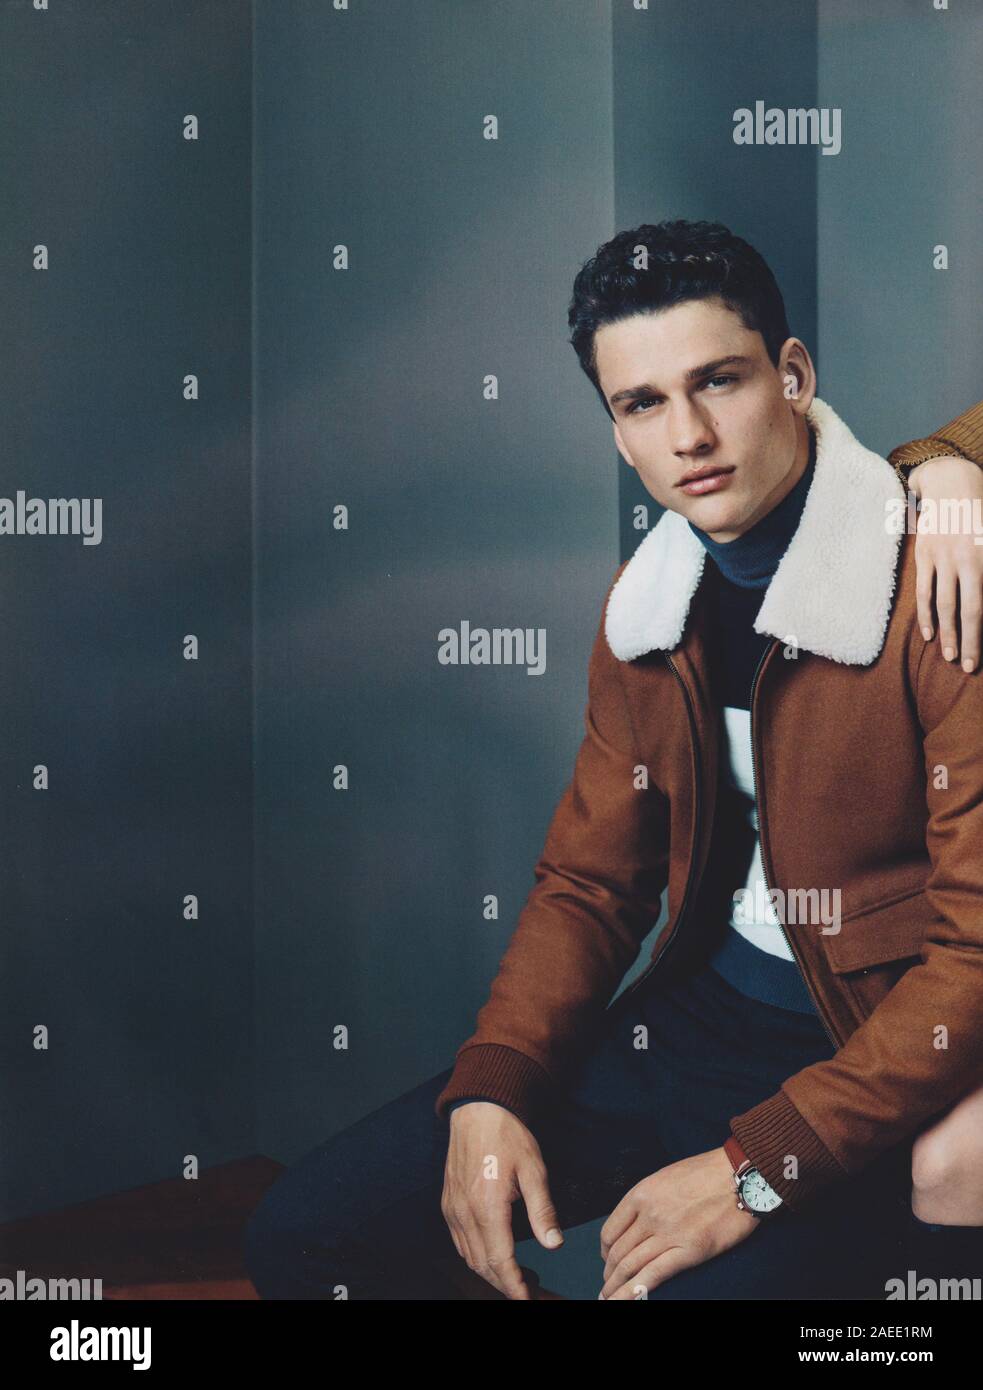 poster advertising River Island fashion house with Simon Nessman in paper  magazine from 2015 year, advertisement, creative River Island 2010s advert  Stock Photo - Alamy